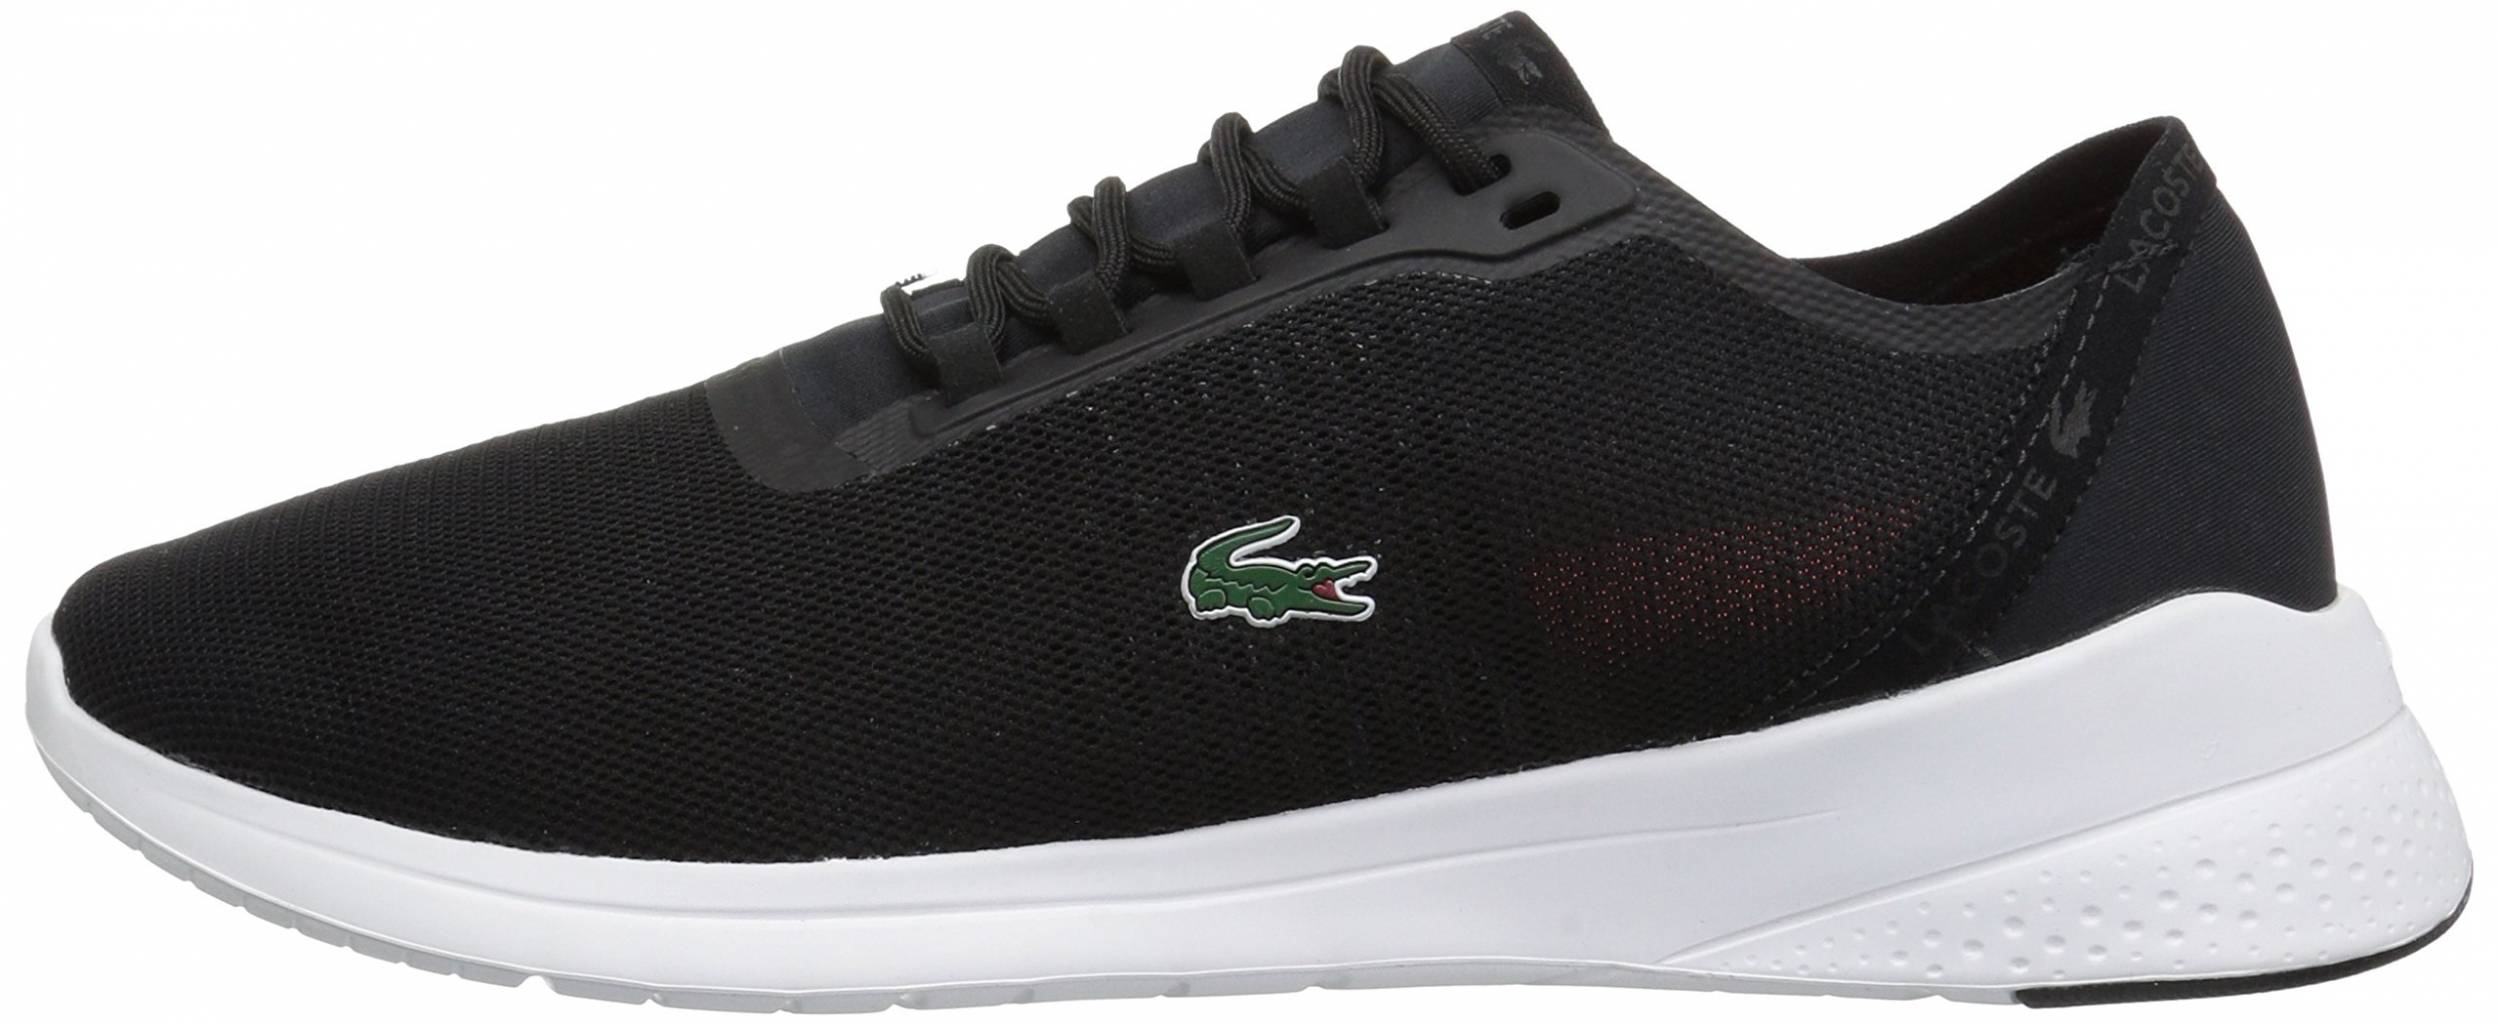 lacoste training shoes